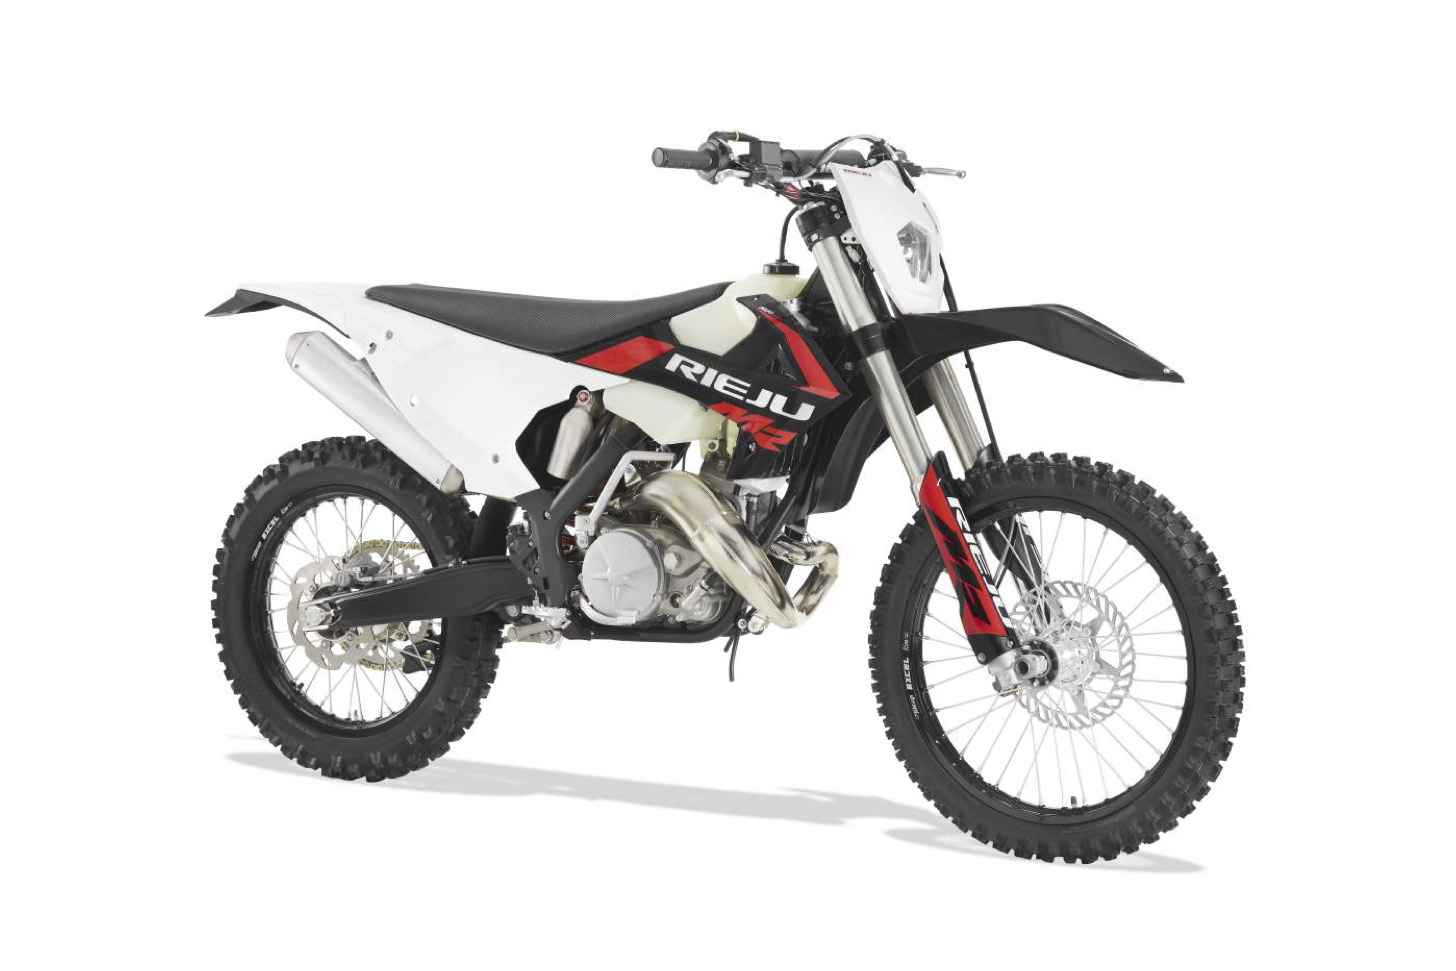 First look: Rieju MR 300 Ranger – Enduro without the race focus